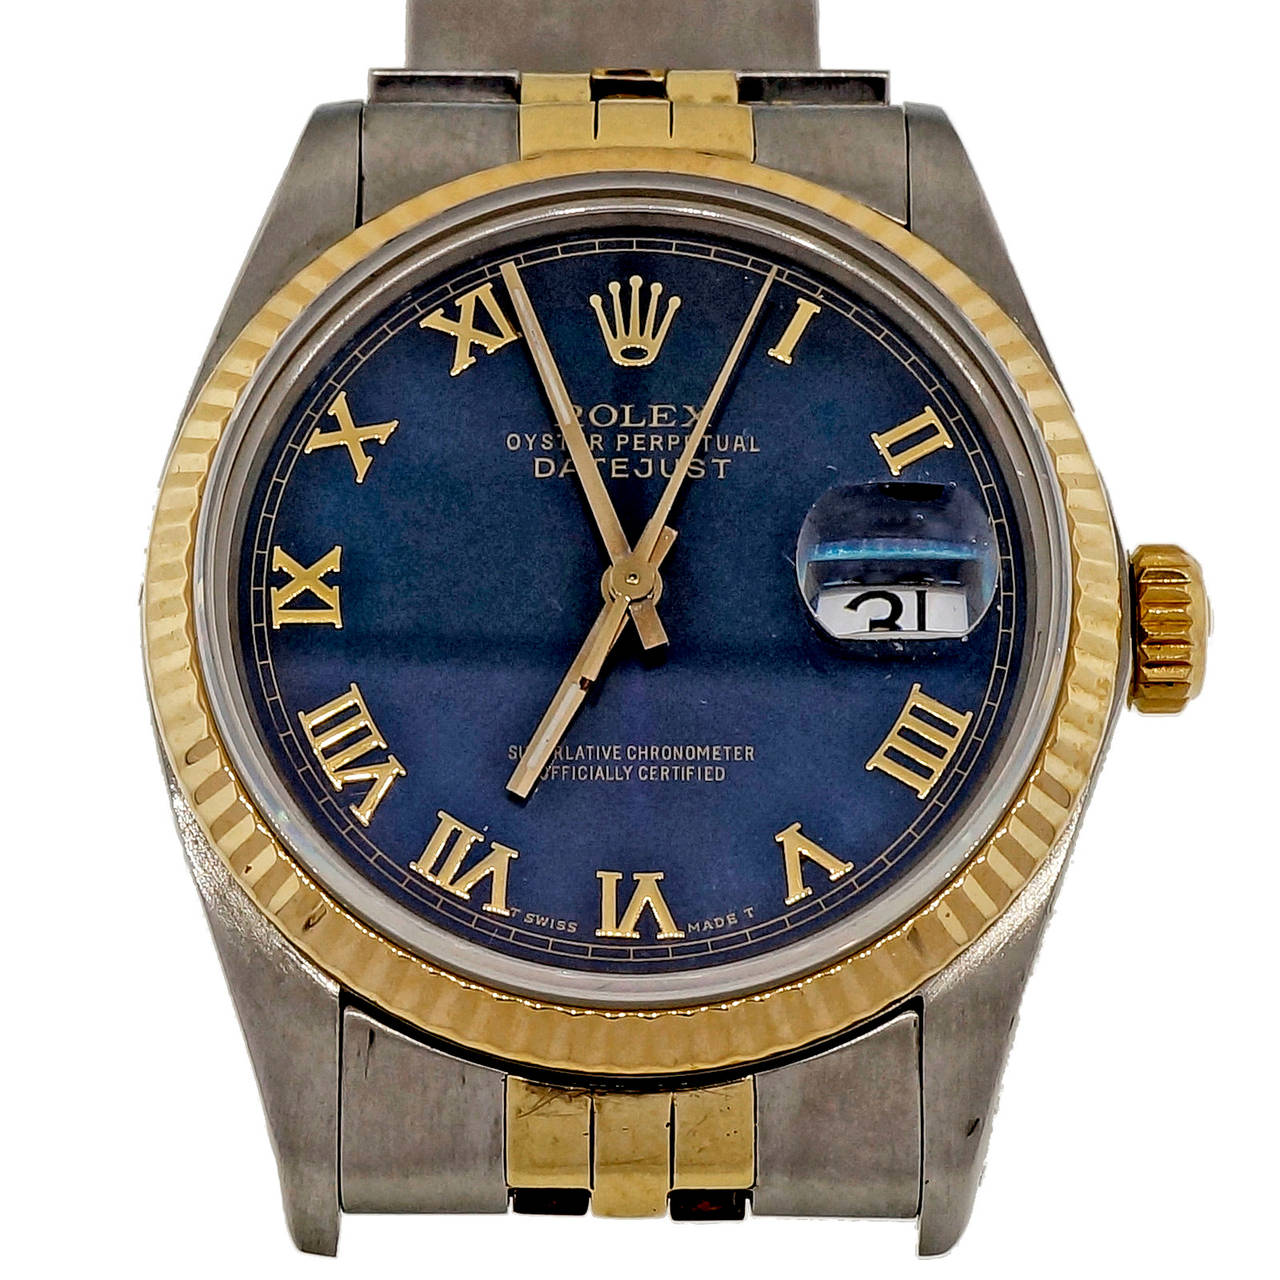 Modern Rolex Yellow Gold Stainless Steel Datejust Custom Color Blue Dial Wristwatch